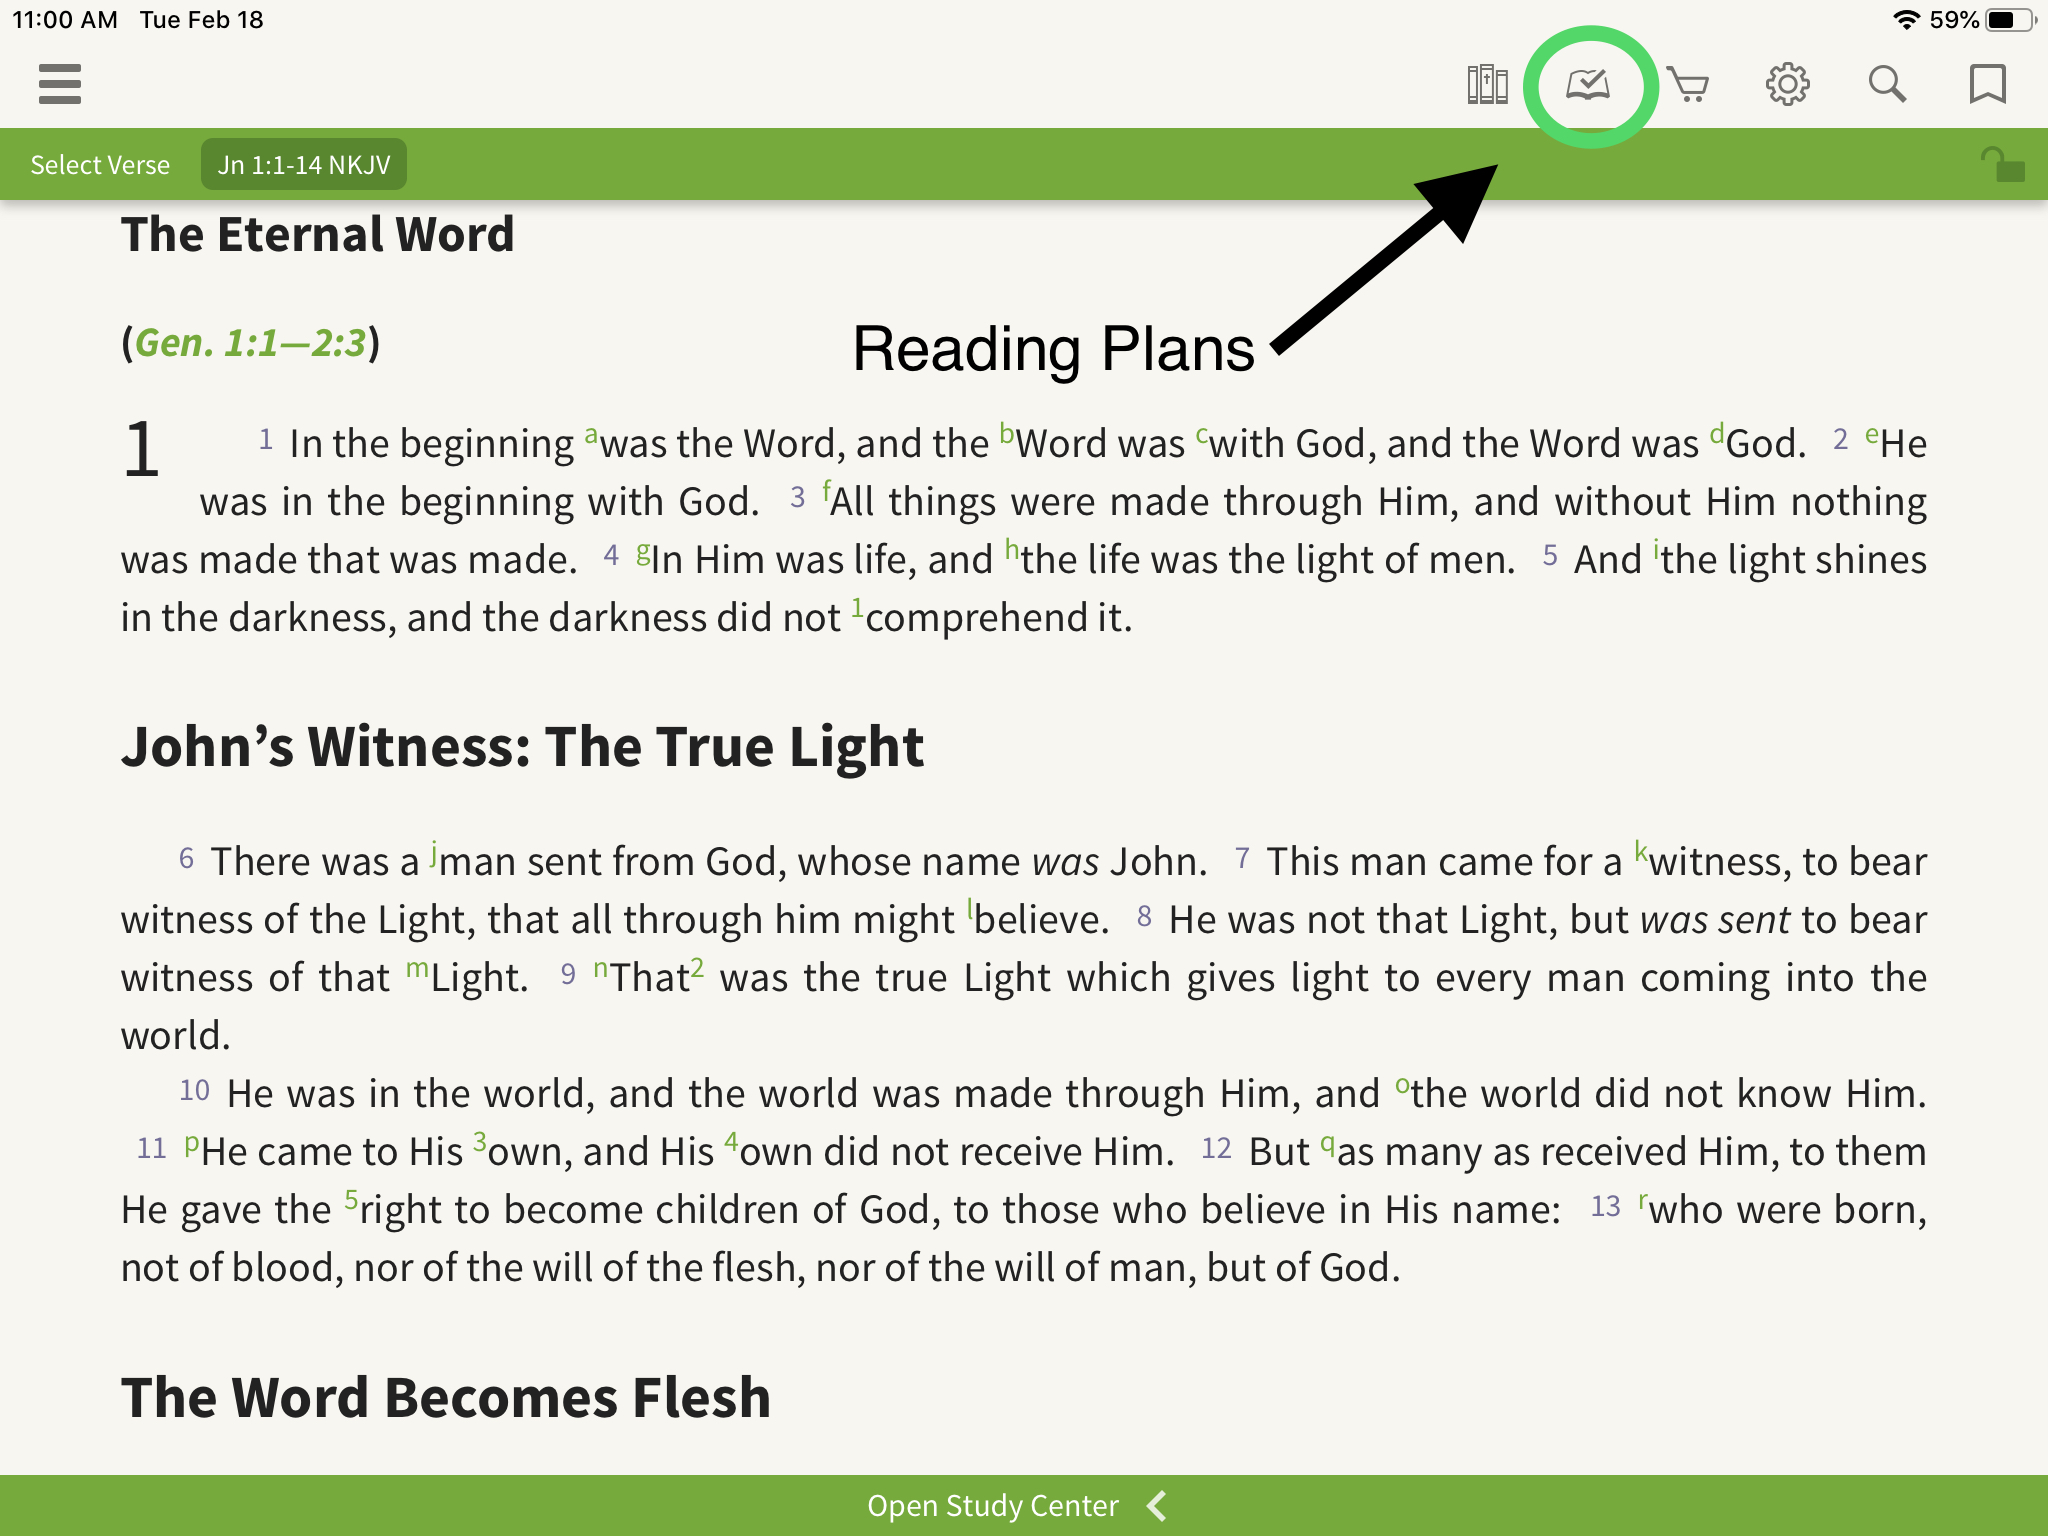 Olive Tree Bible App arrow pointing toward reading plan page